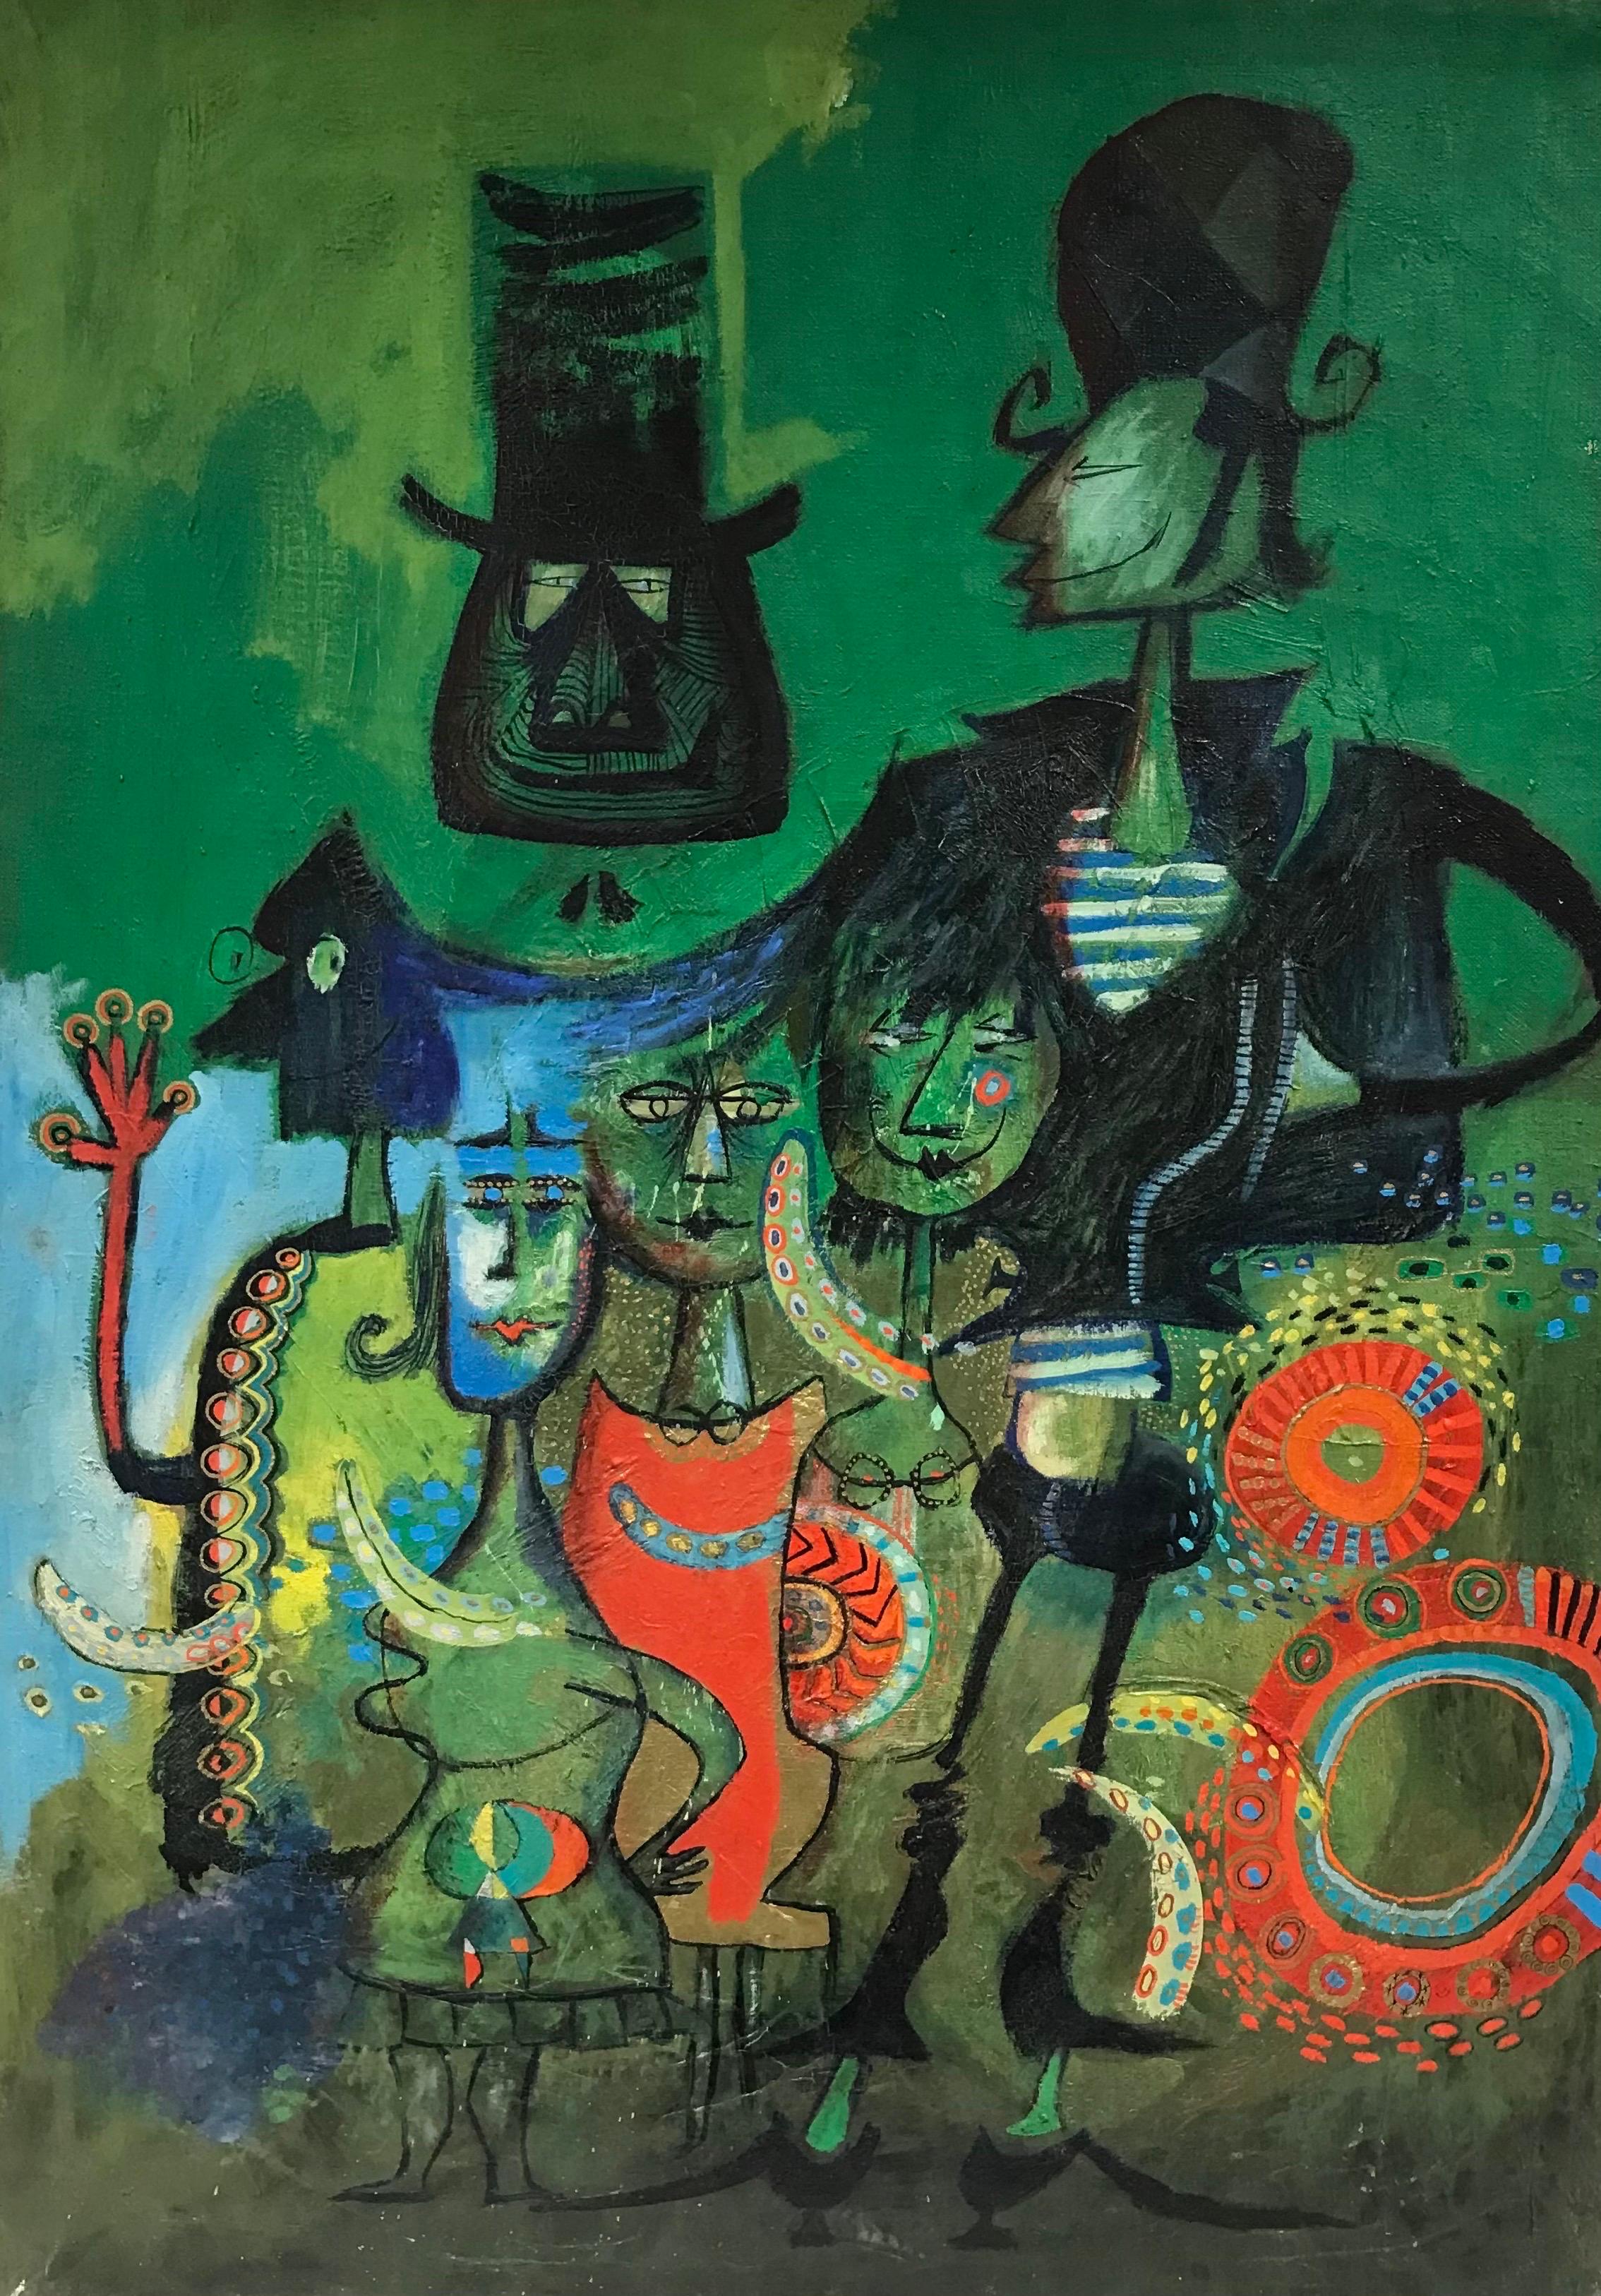 20th Century French School Abstract Painting - 1960's French Modernist Oil Painting Green background with Bizarre Figures